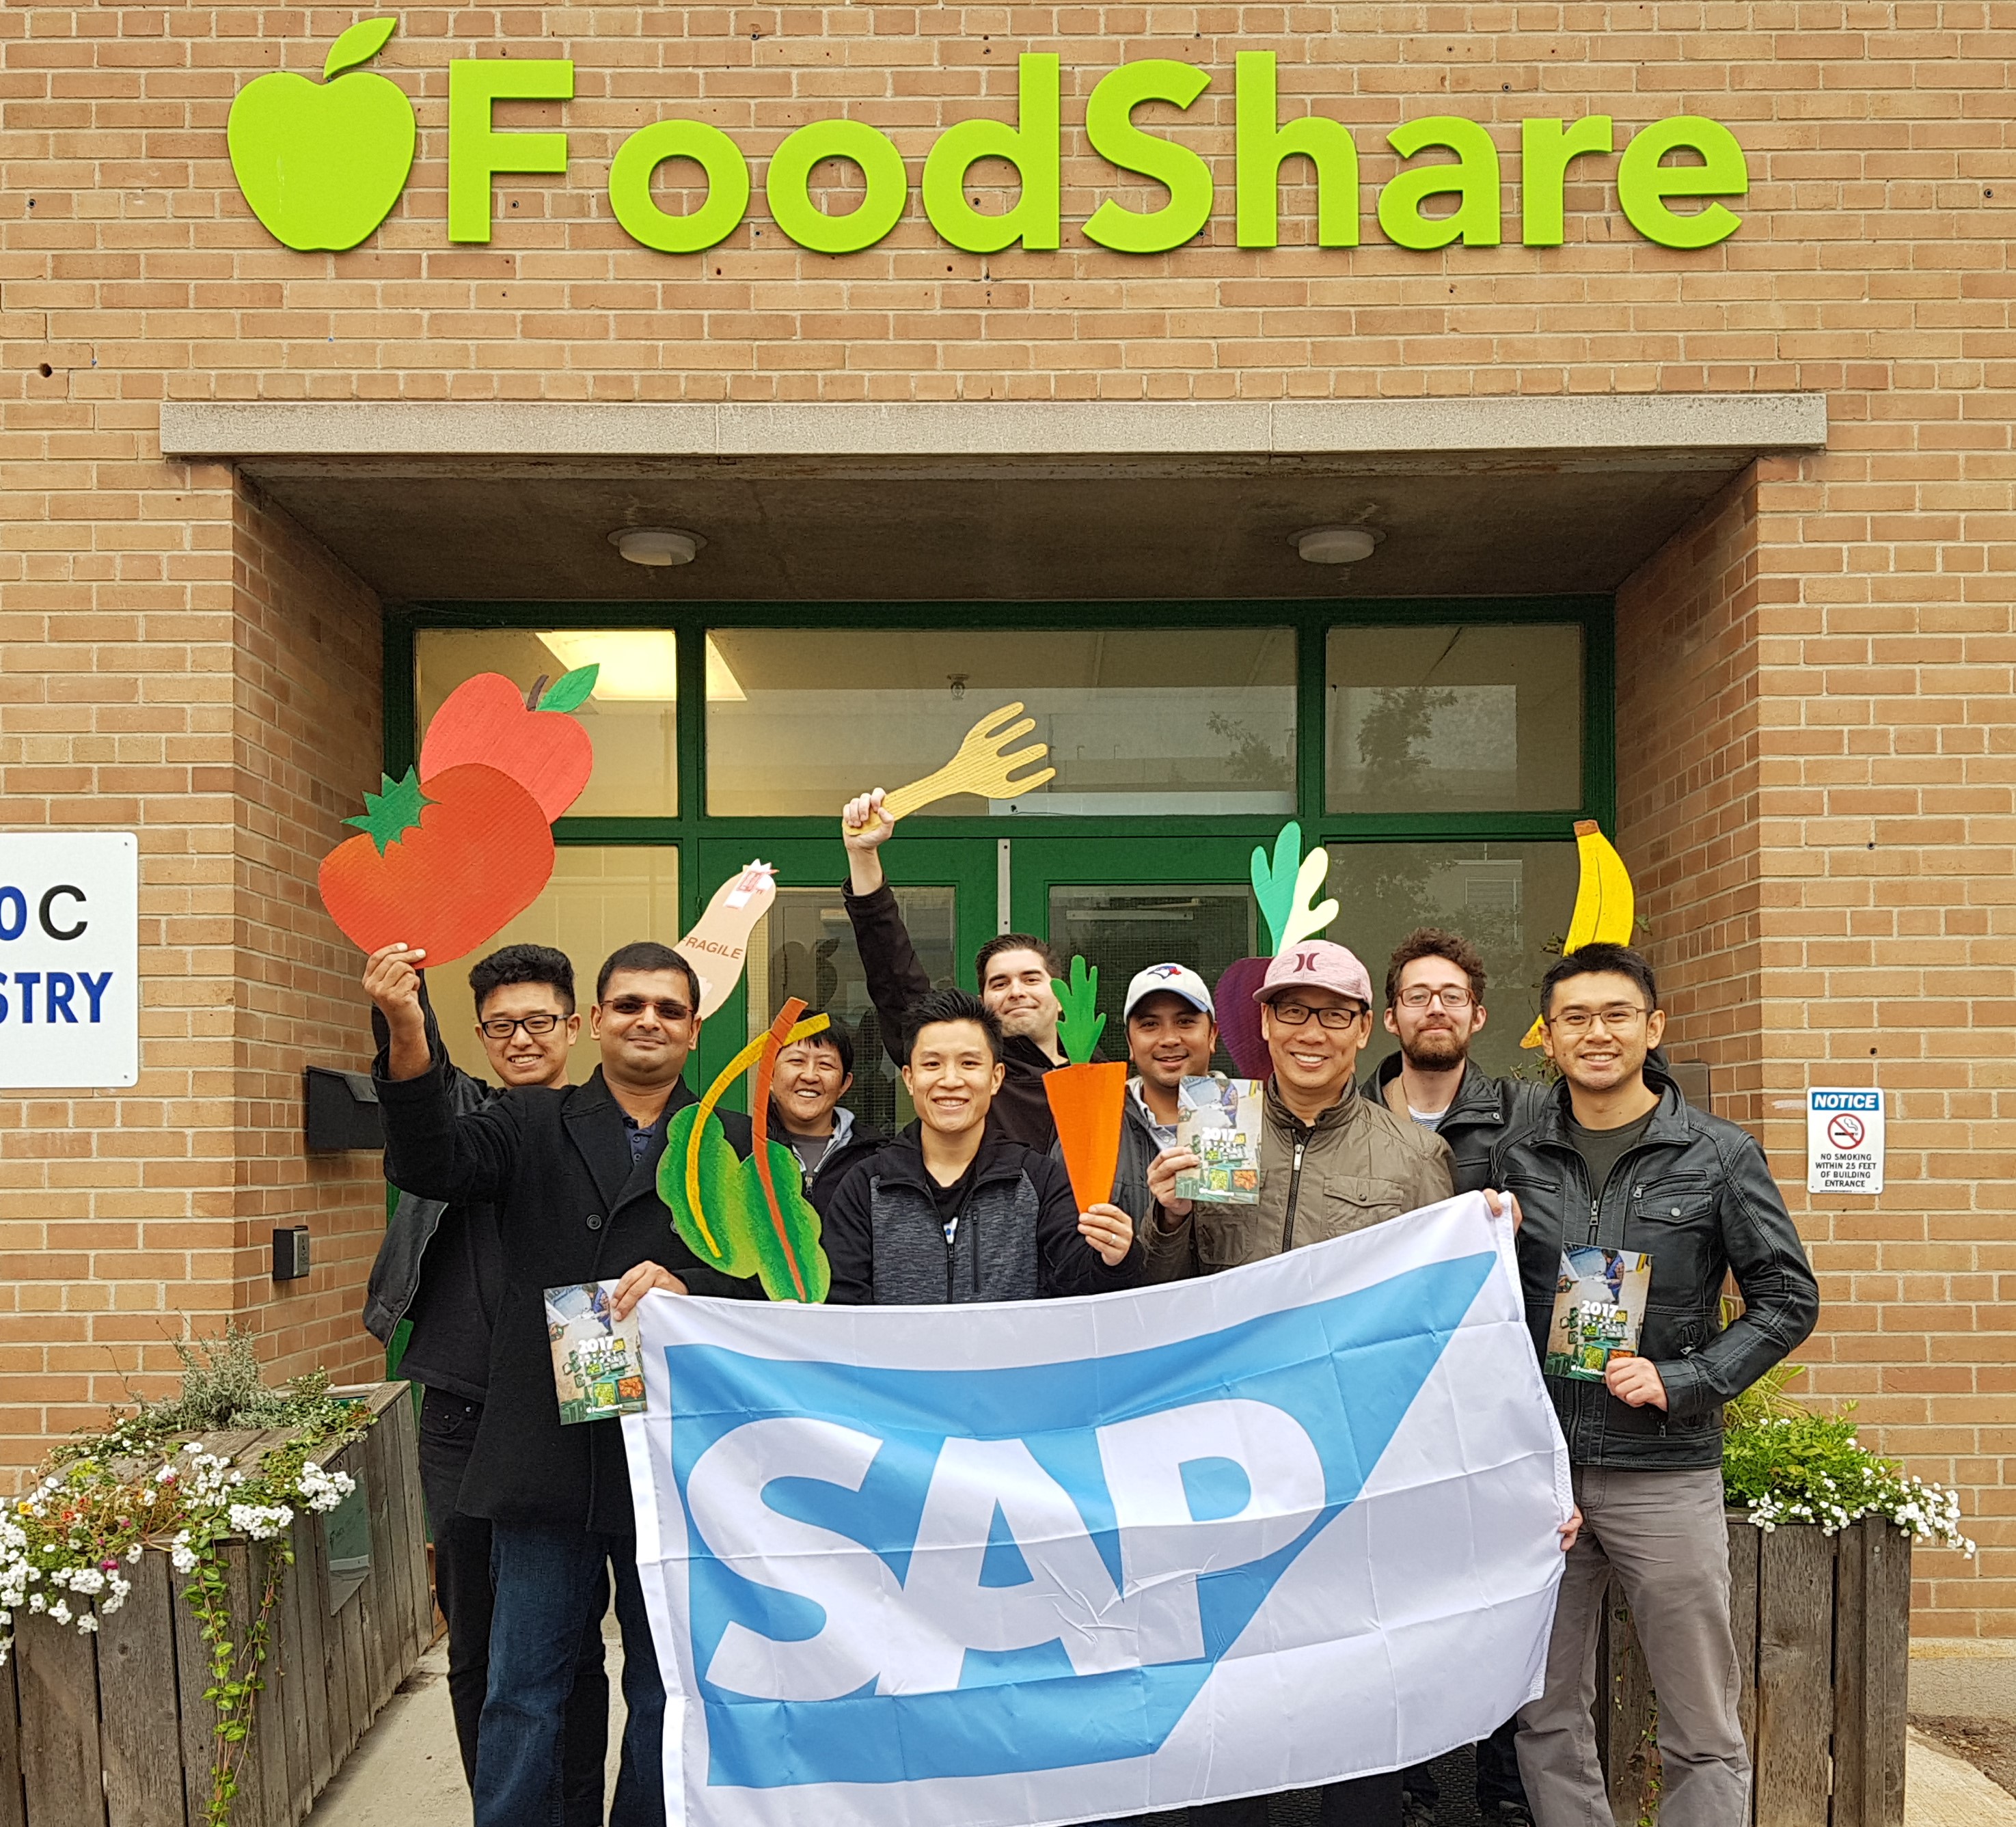 Volunteers from SAP volunteered at FoodShare on behalf of Month of Service, packing Super School Packers for youth breakfast programs.